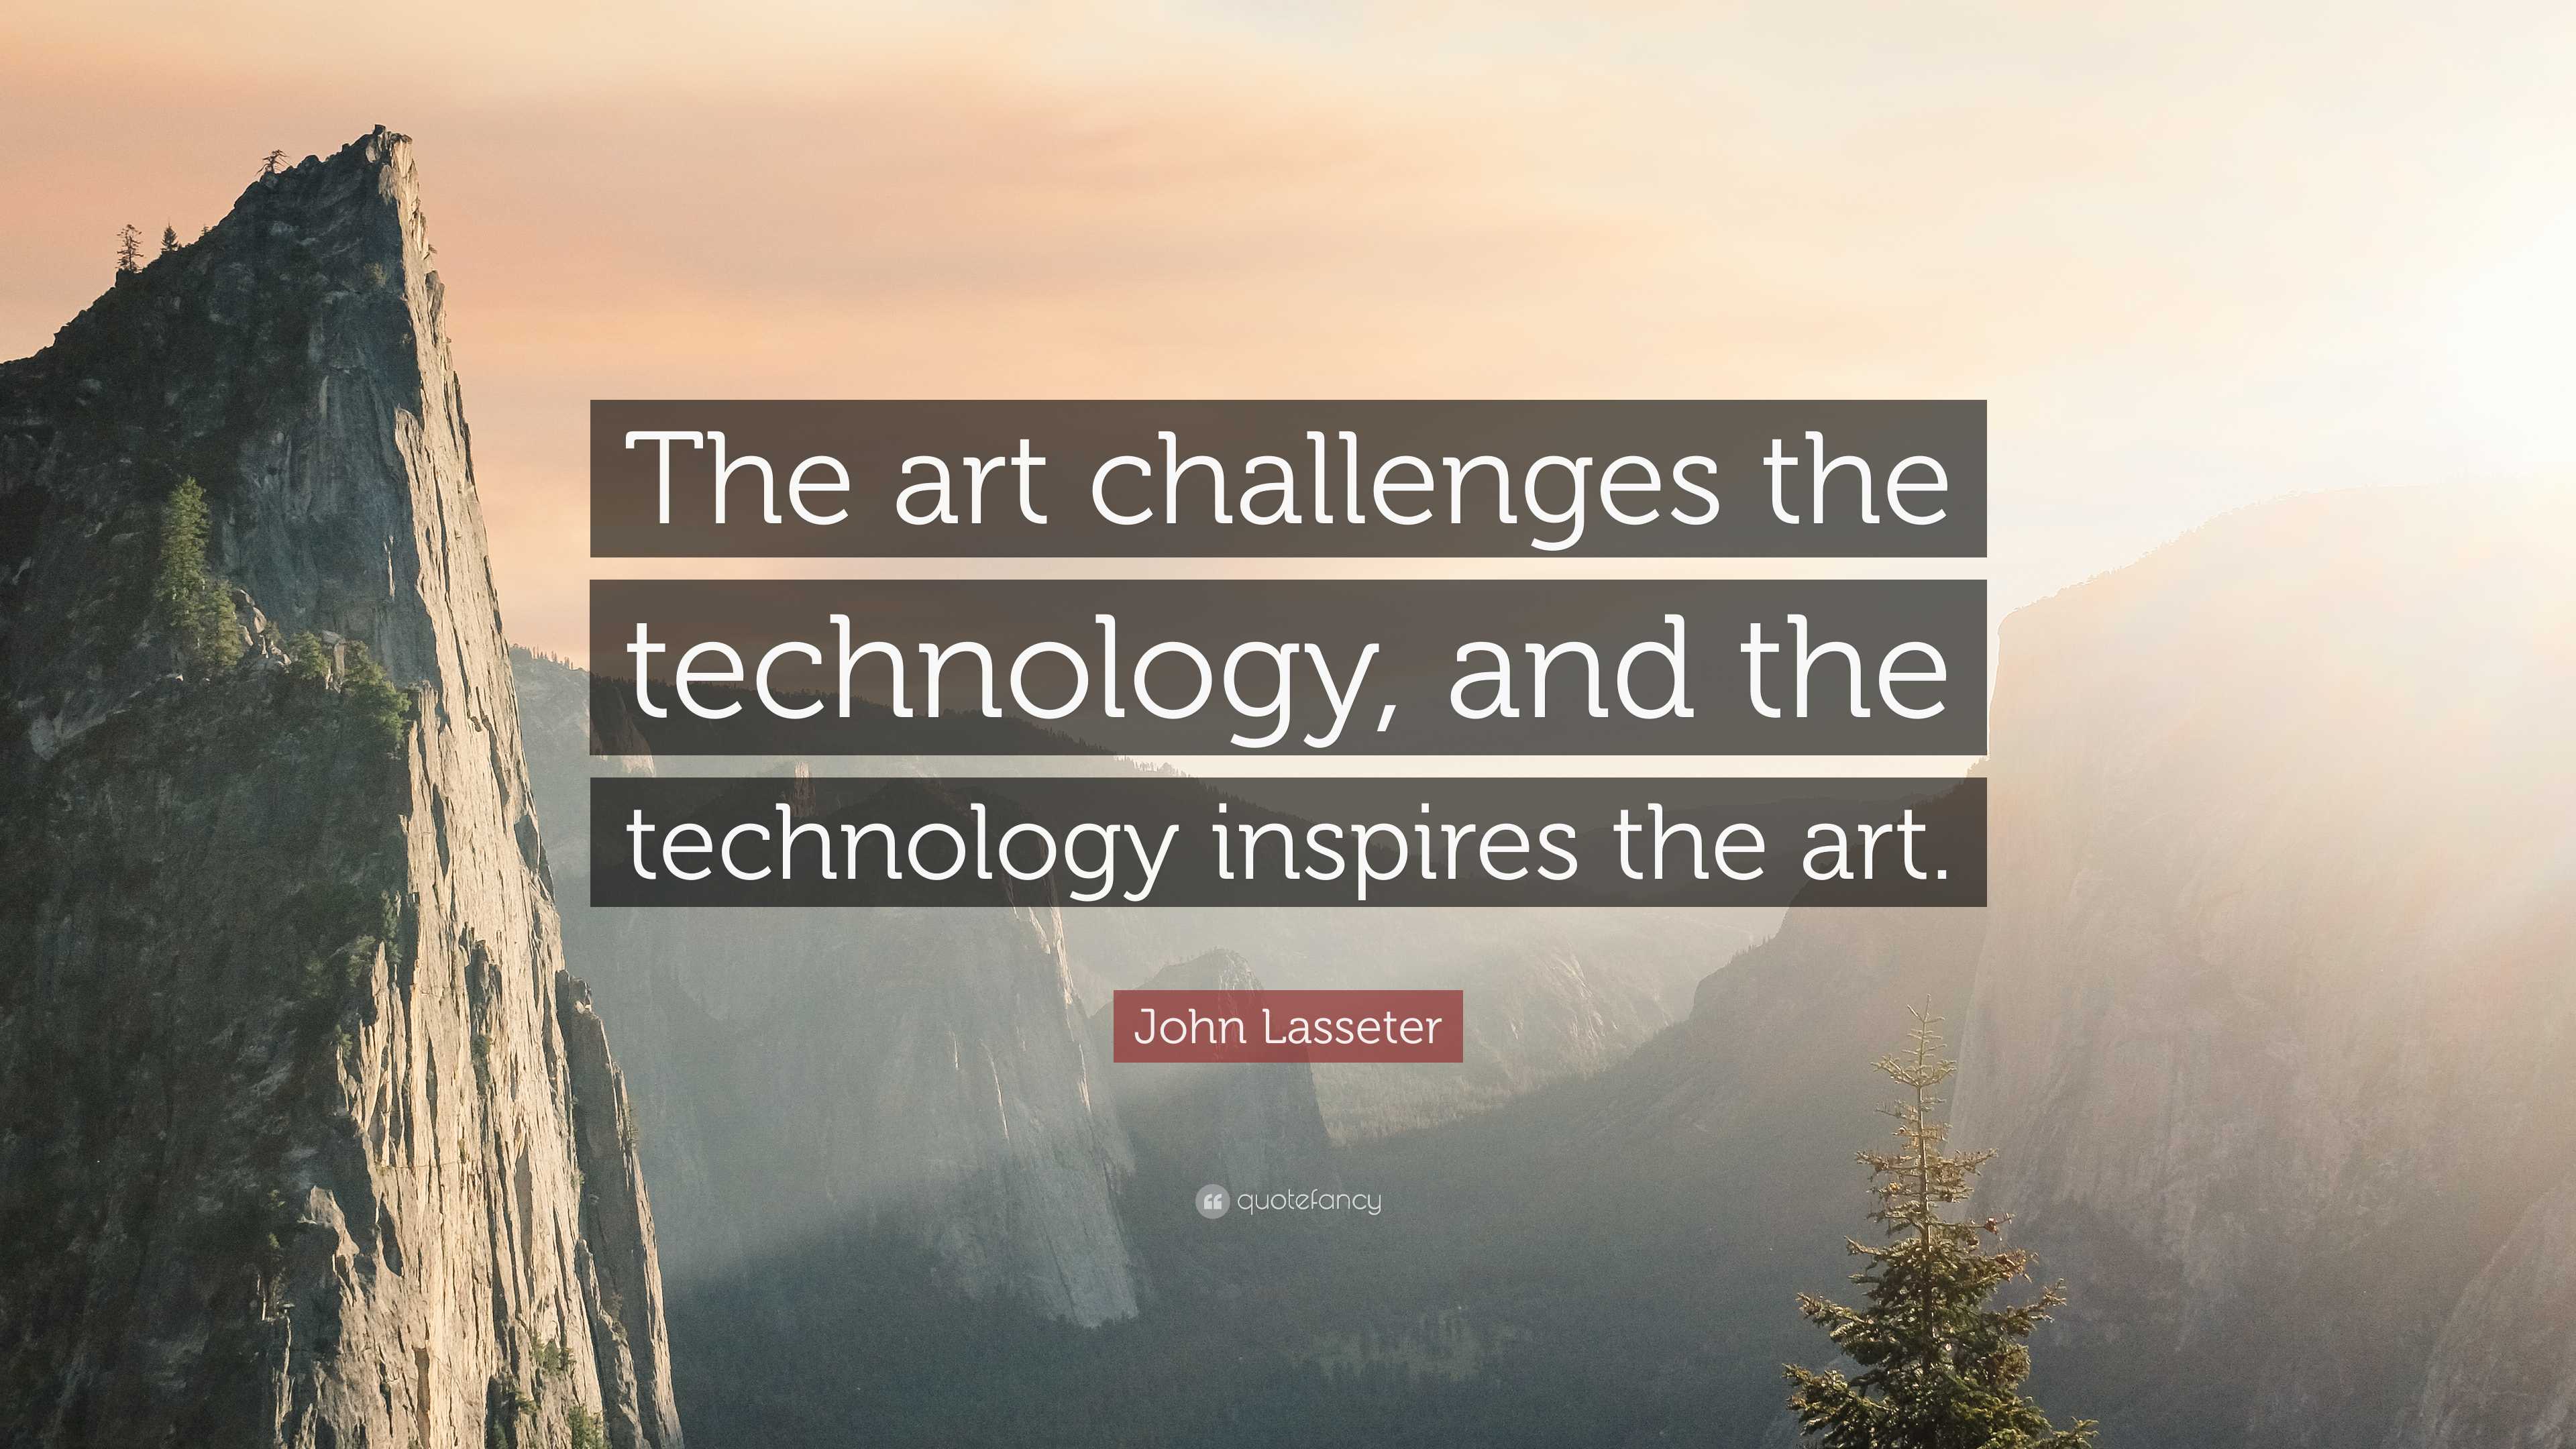 John Lasseter Quote: “The art challenges the technology, and the ...